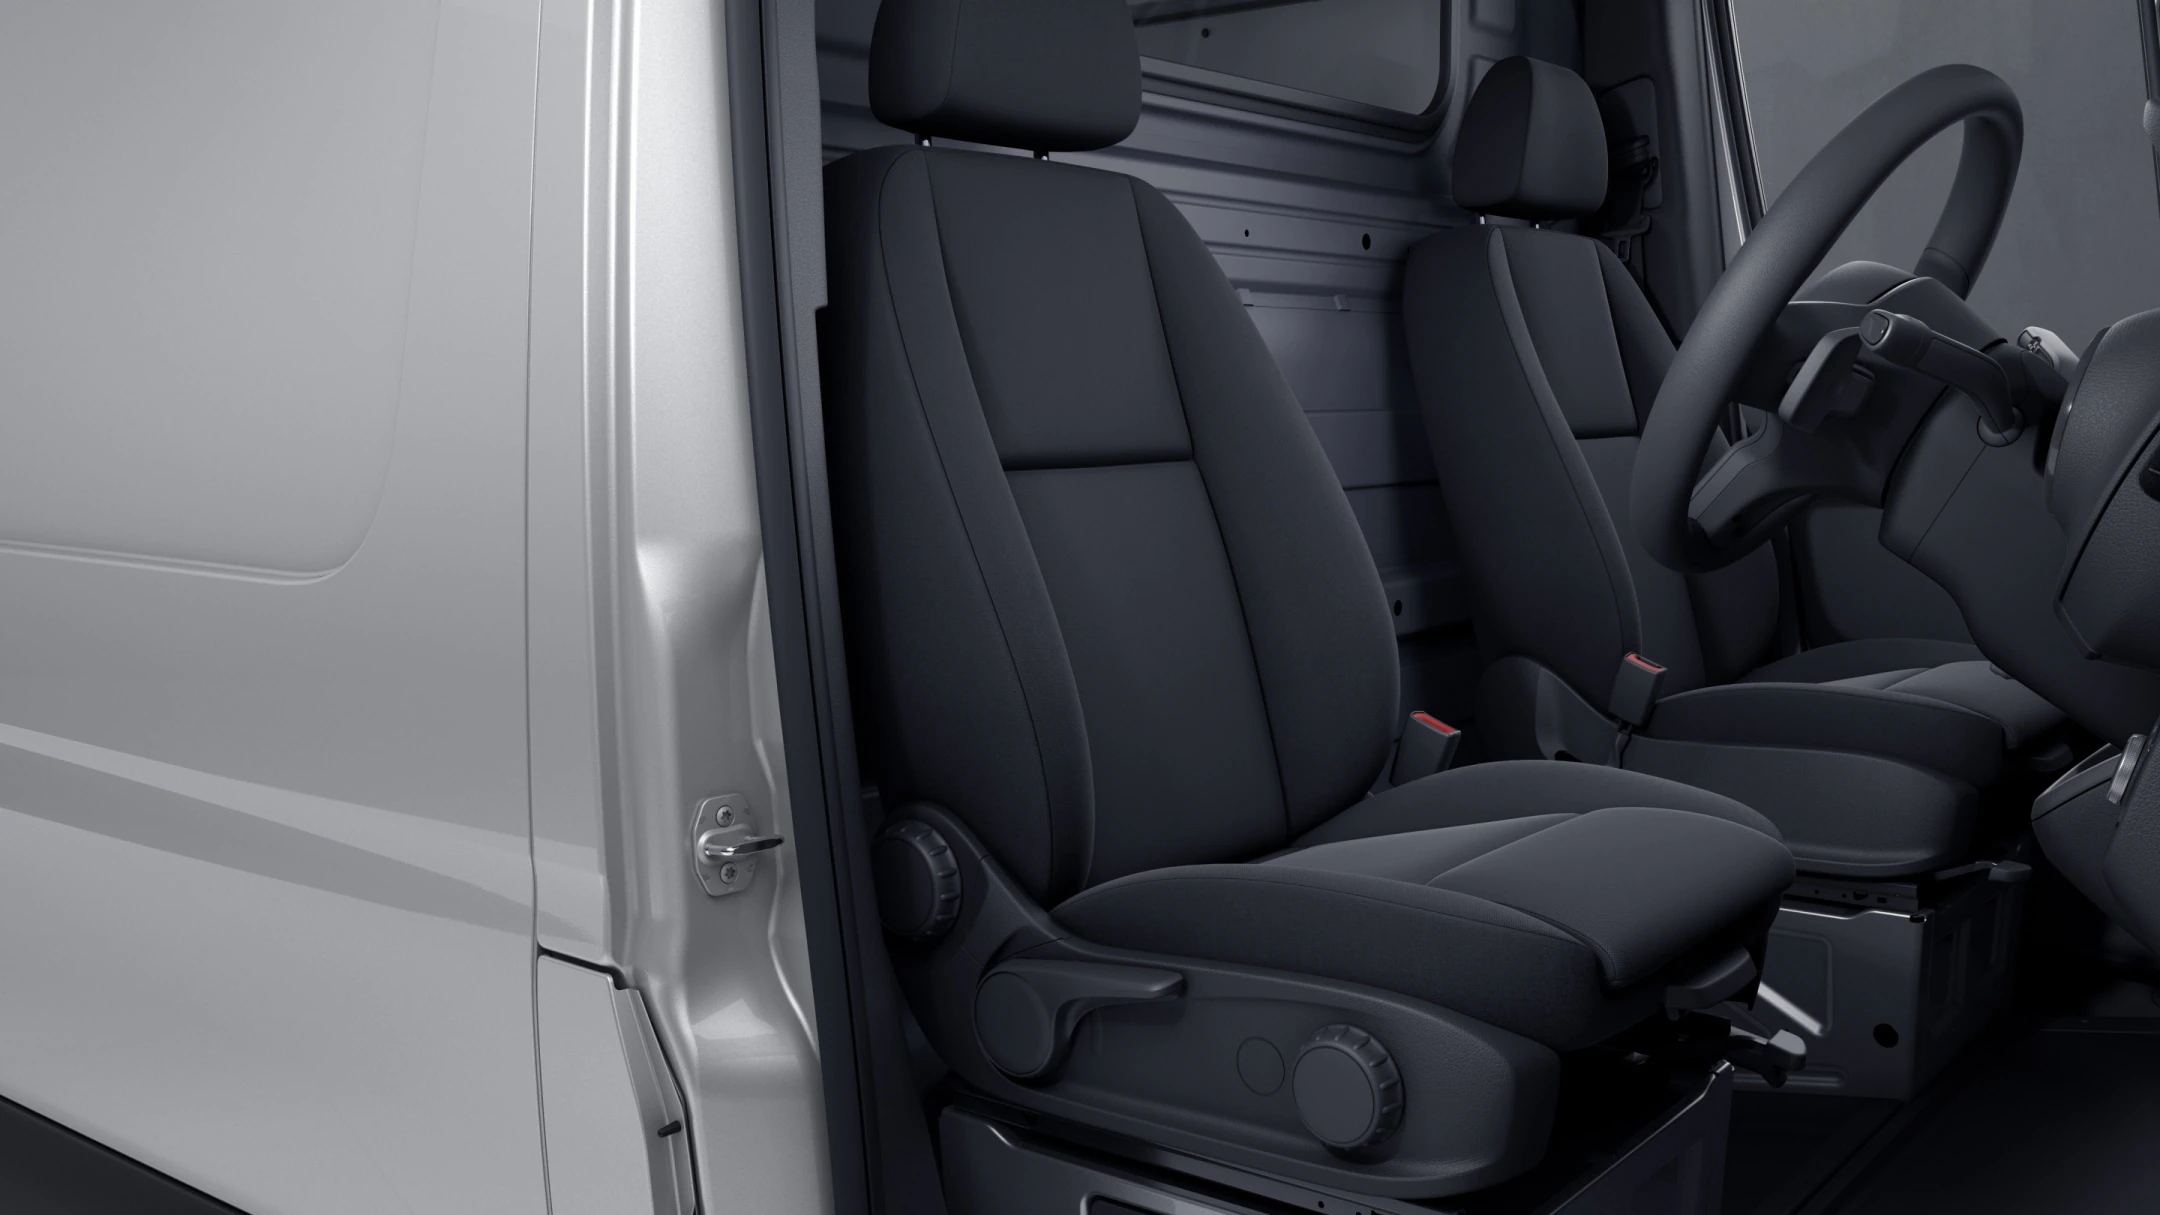 Superior comfort for all-day drivers